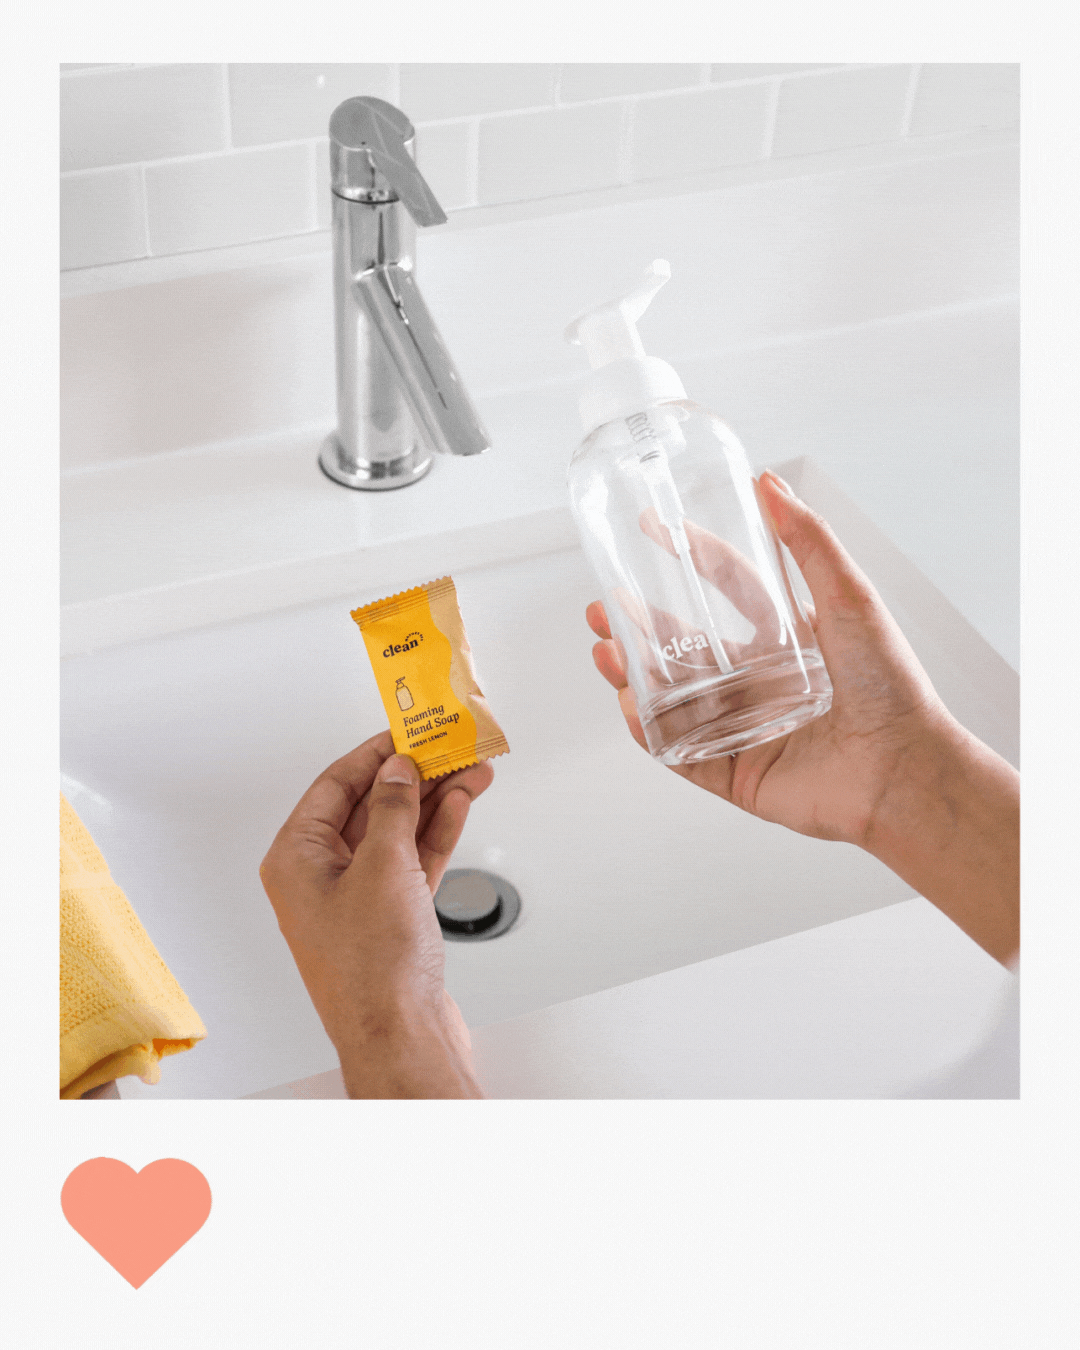 Instagram polaroid image of person holding a bottle and soap tablet preparing to make their dissolvable foaming hand soap tablet